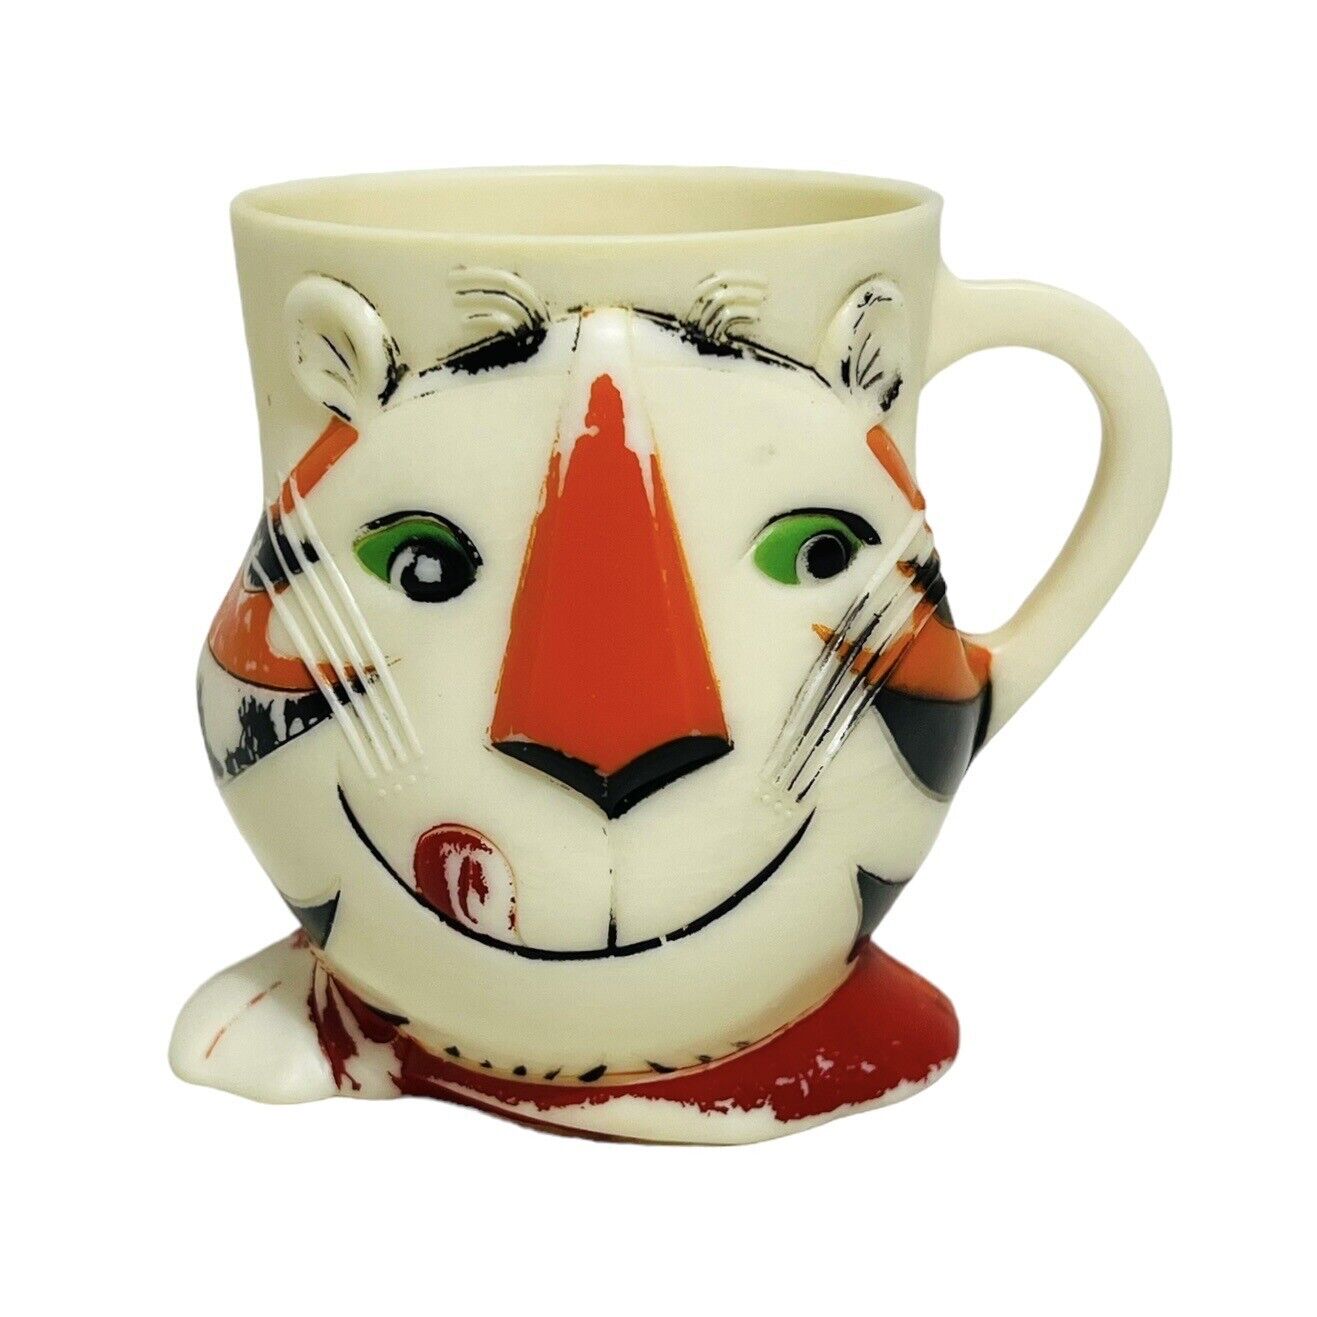 Vtg 1960's Kellogg's Tony Tiger Cup Frosted Flakes Cereal Plastic Mold Mug Milk